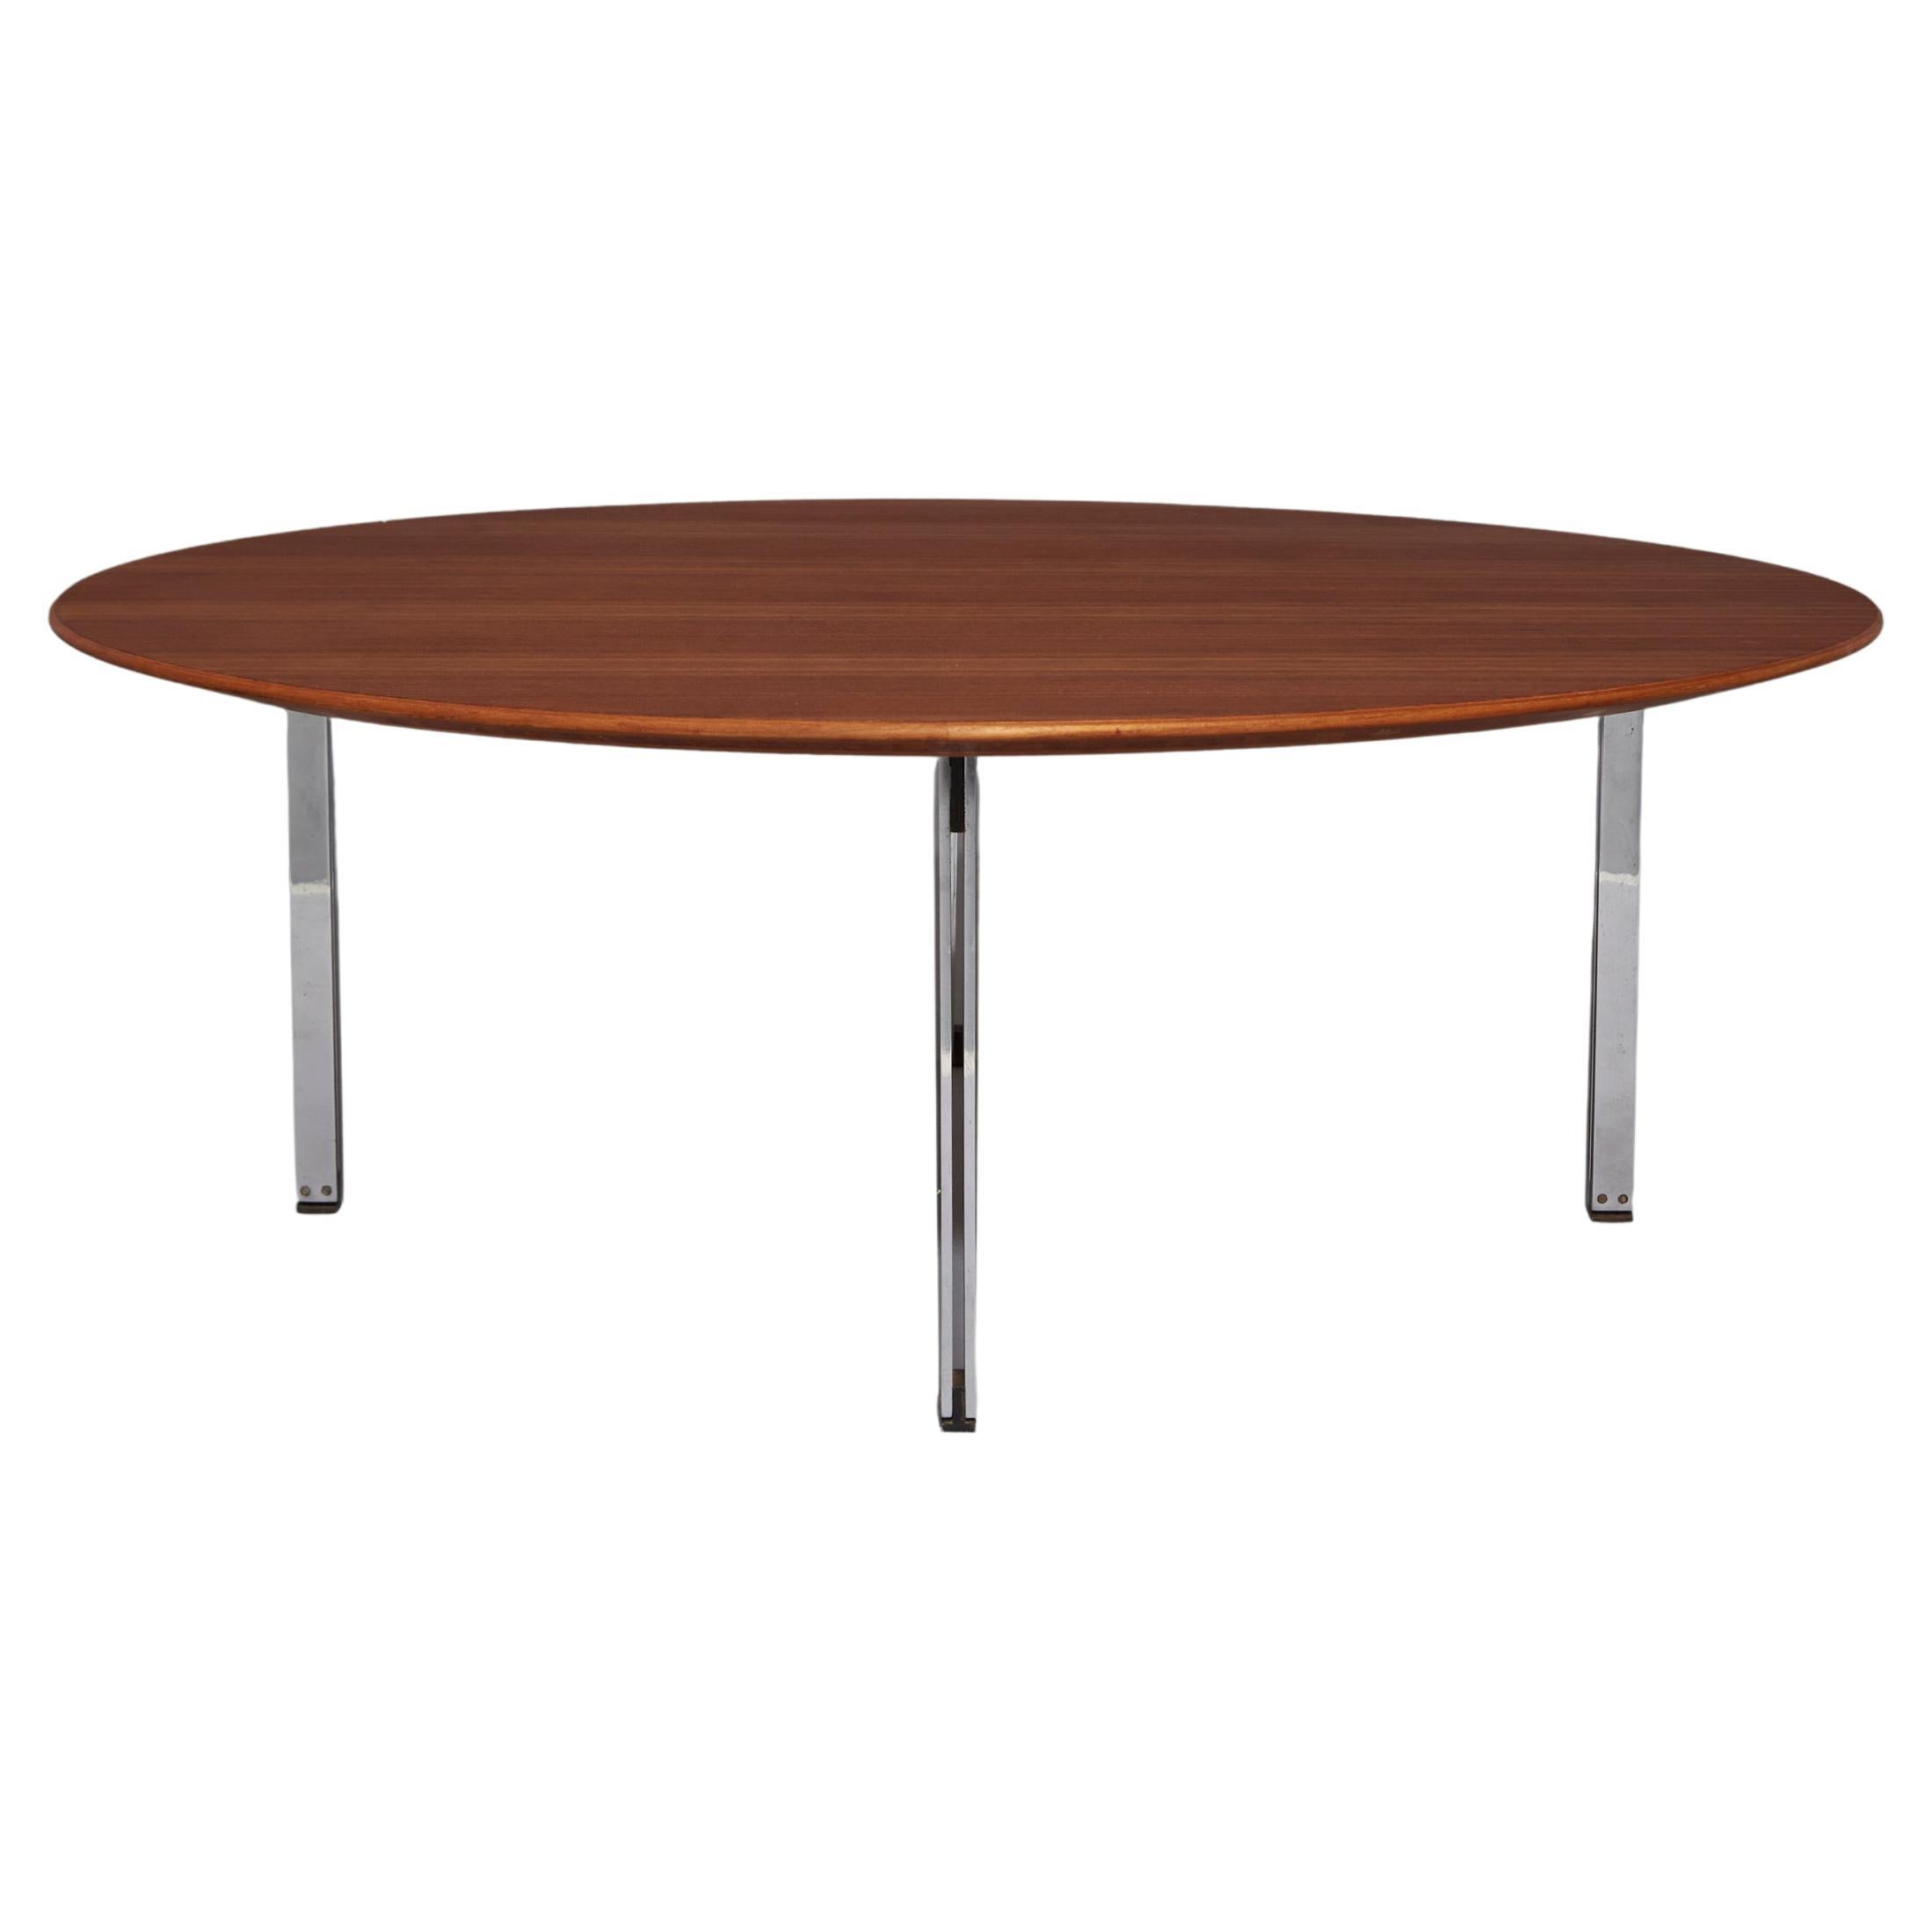 1950s Florence Knoll Coffee Table in Walnut and Chrome Steel